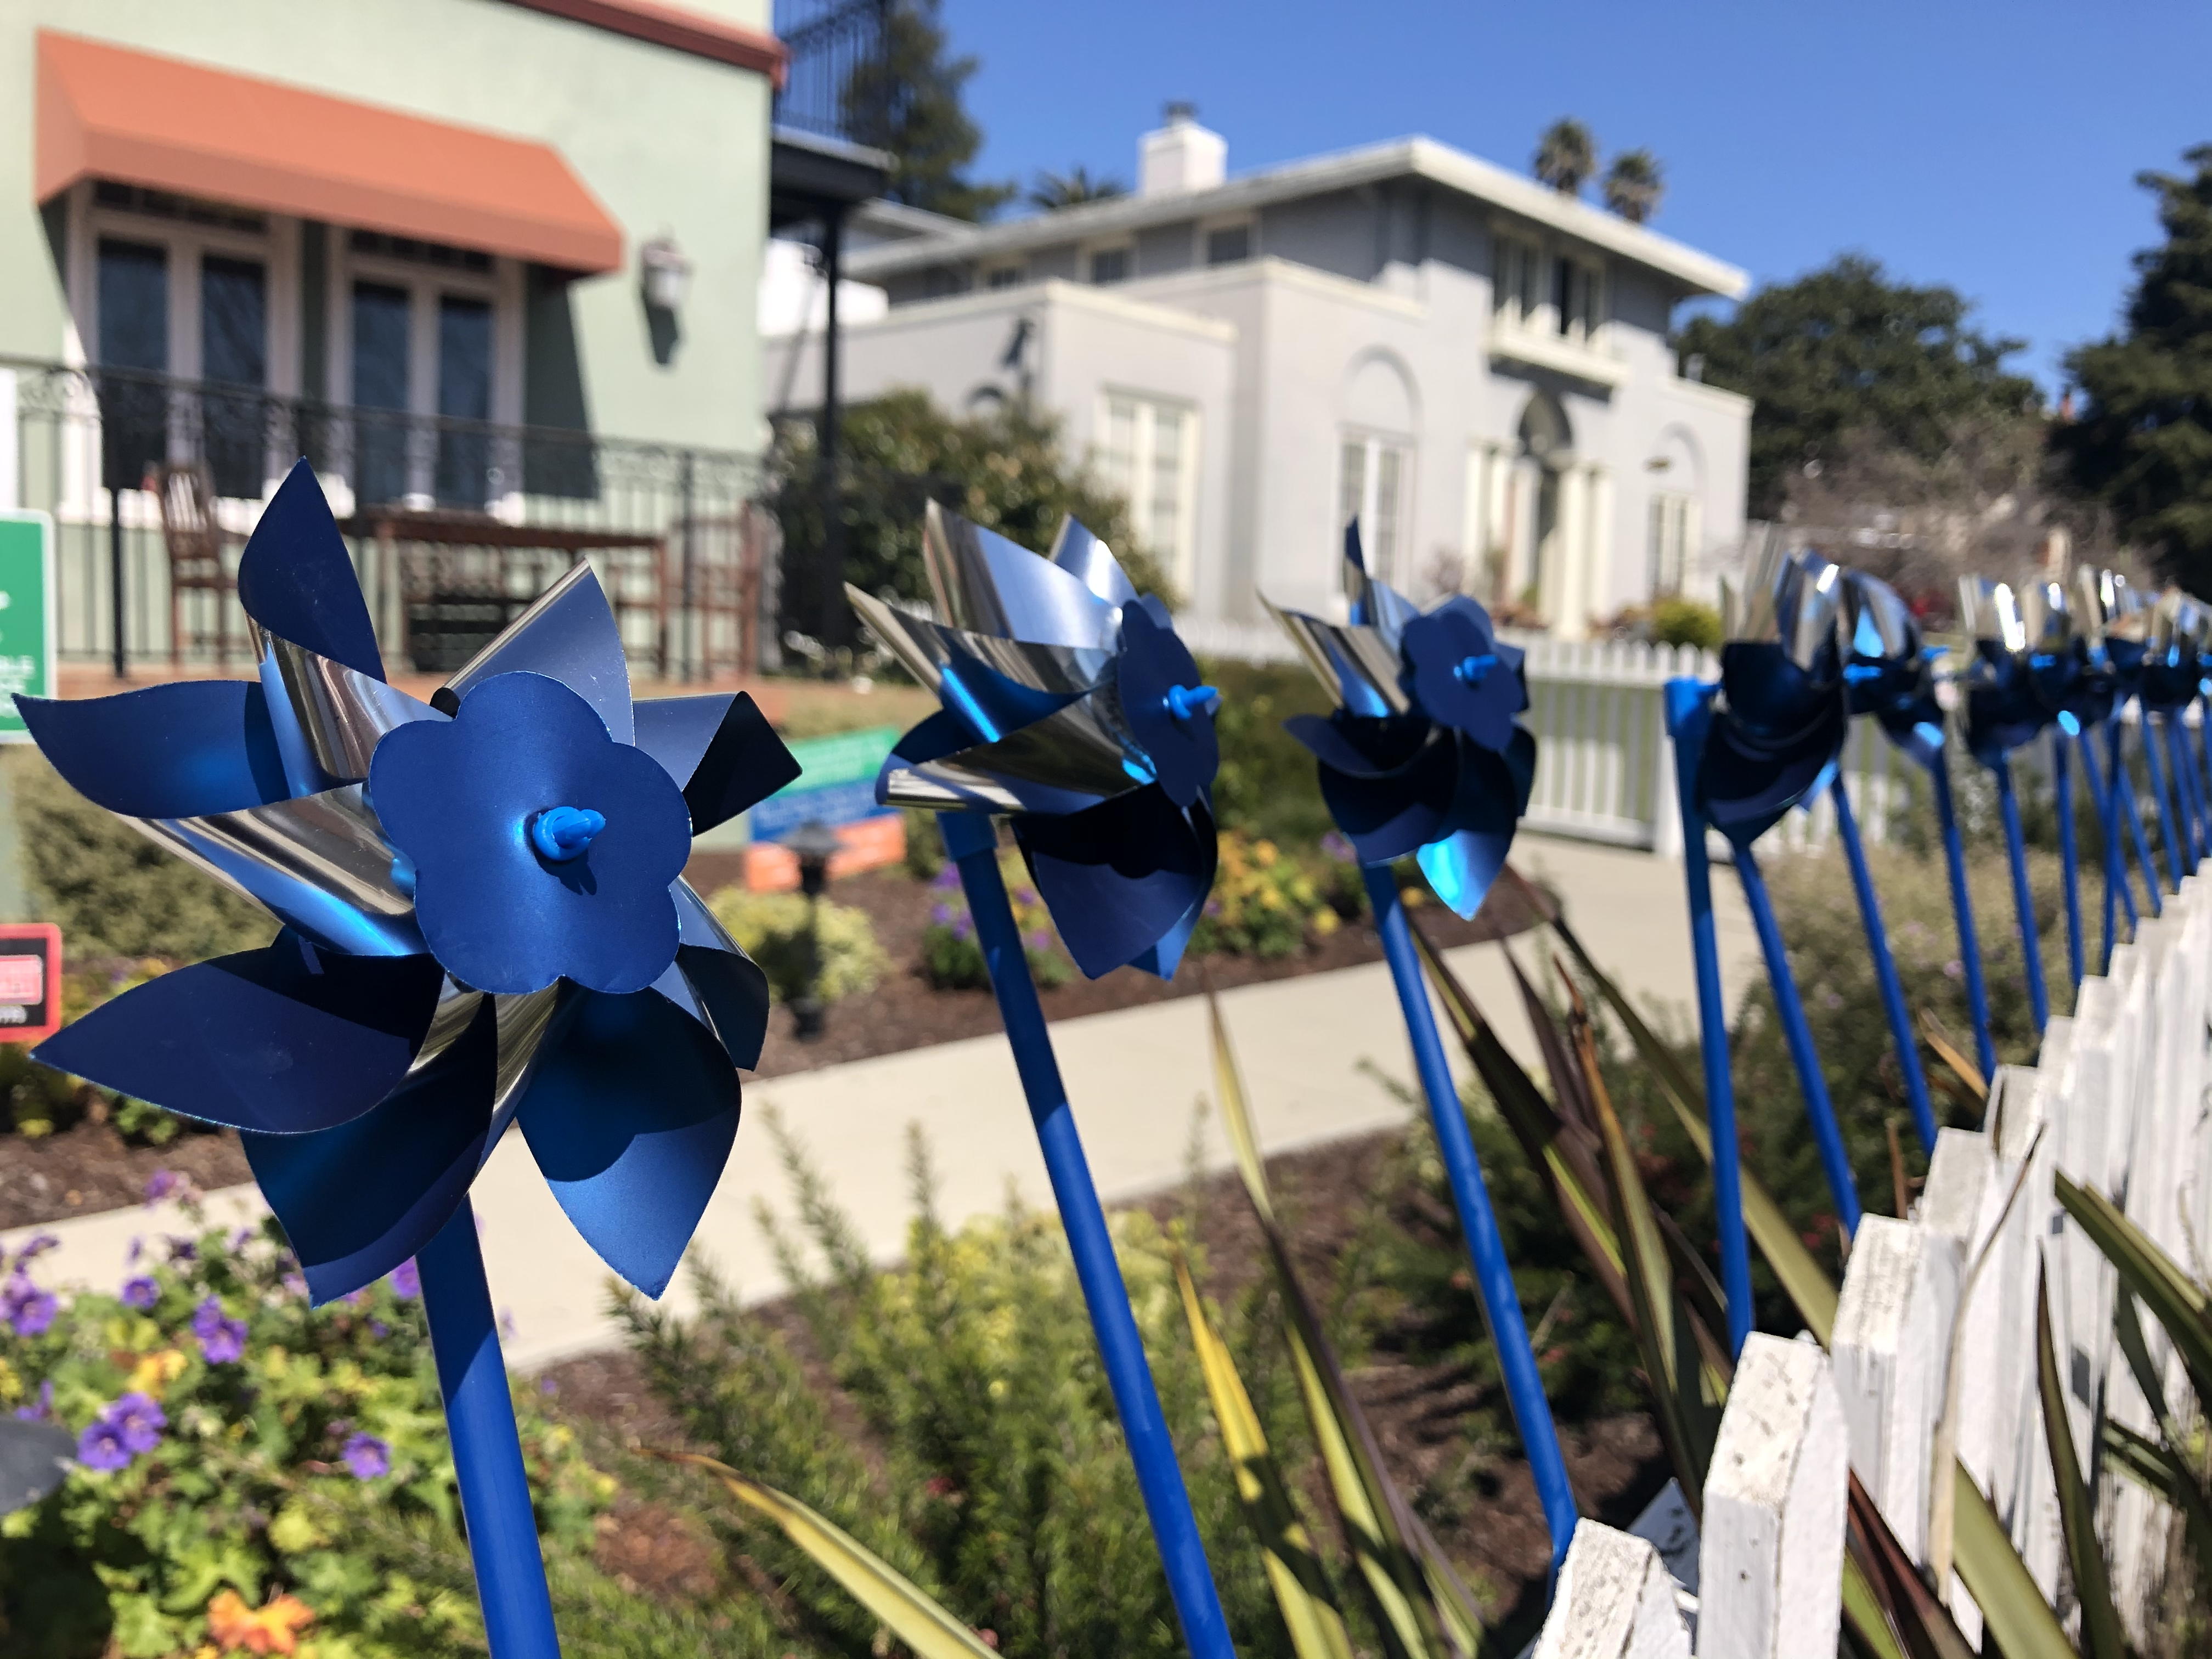 Putting up Pinwheels for Child Abuse Prevention Month